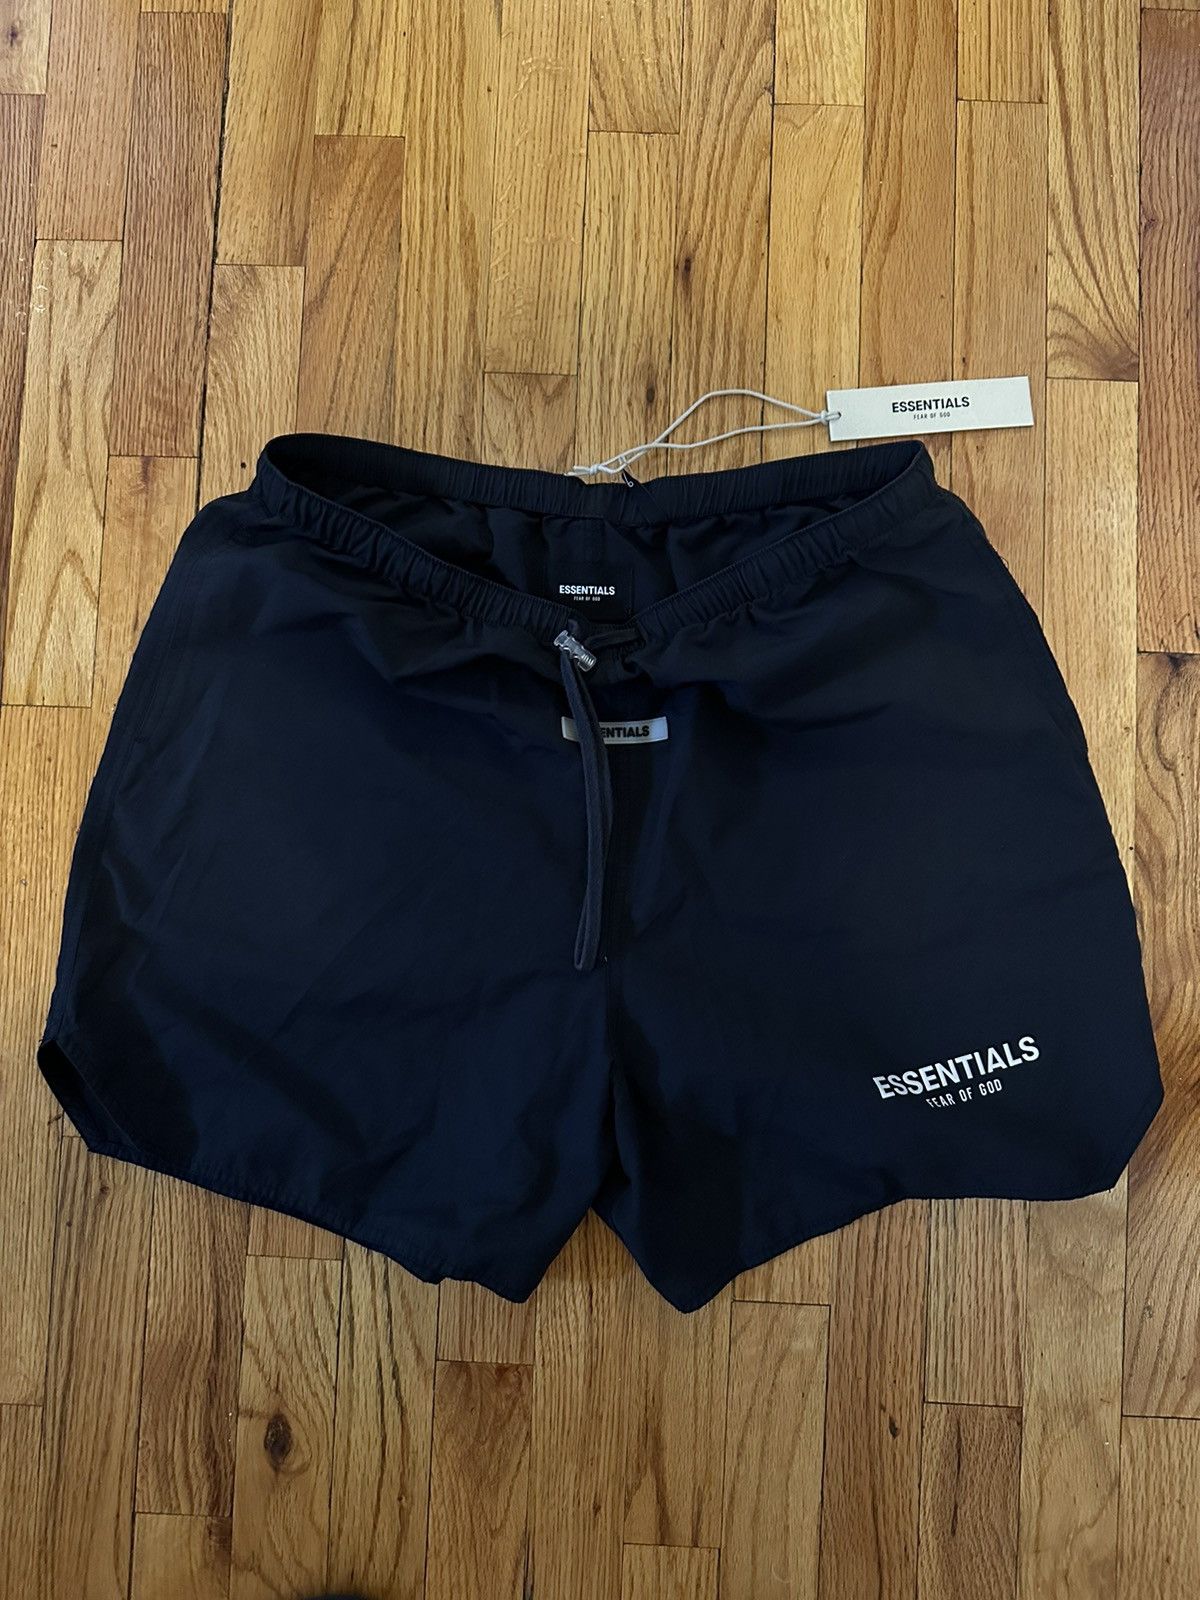 Fear of God Fear of God Nylon Active Shorts Size Large OFFER UP! FINAL |  Grailed